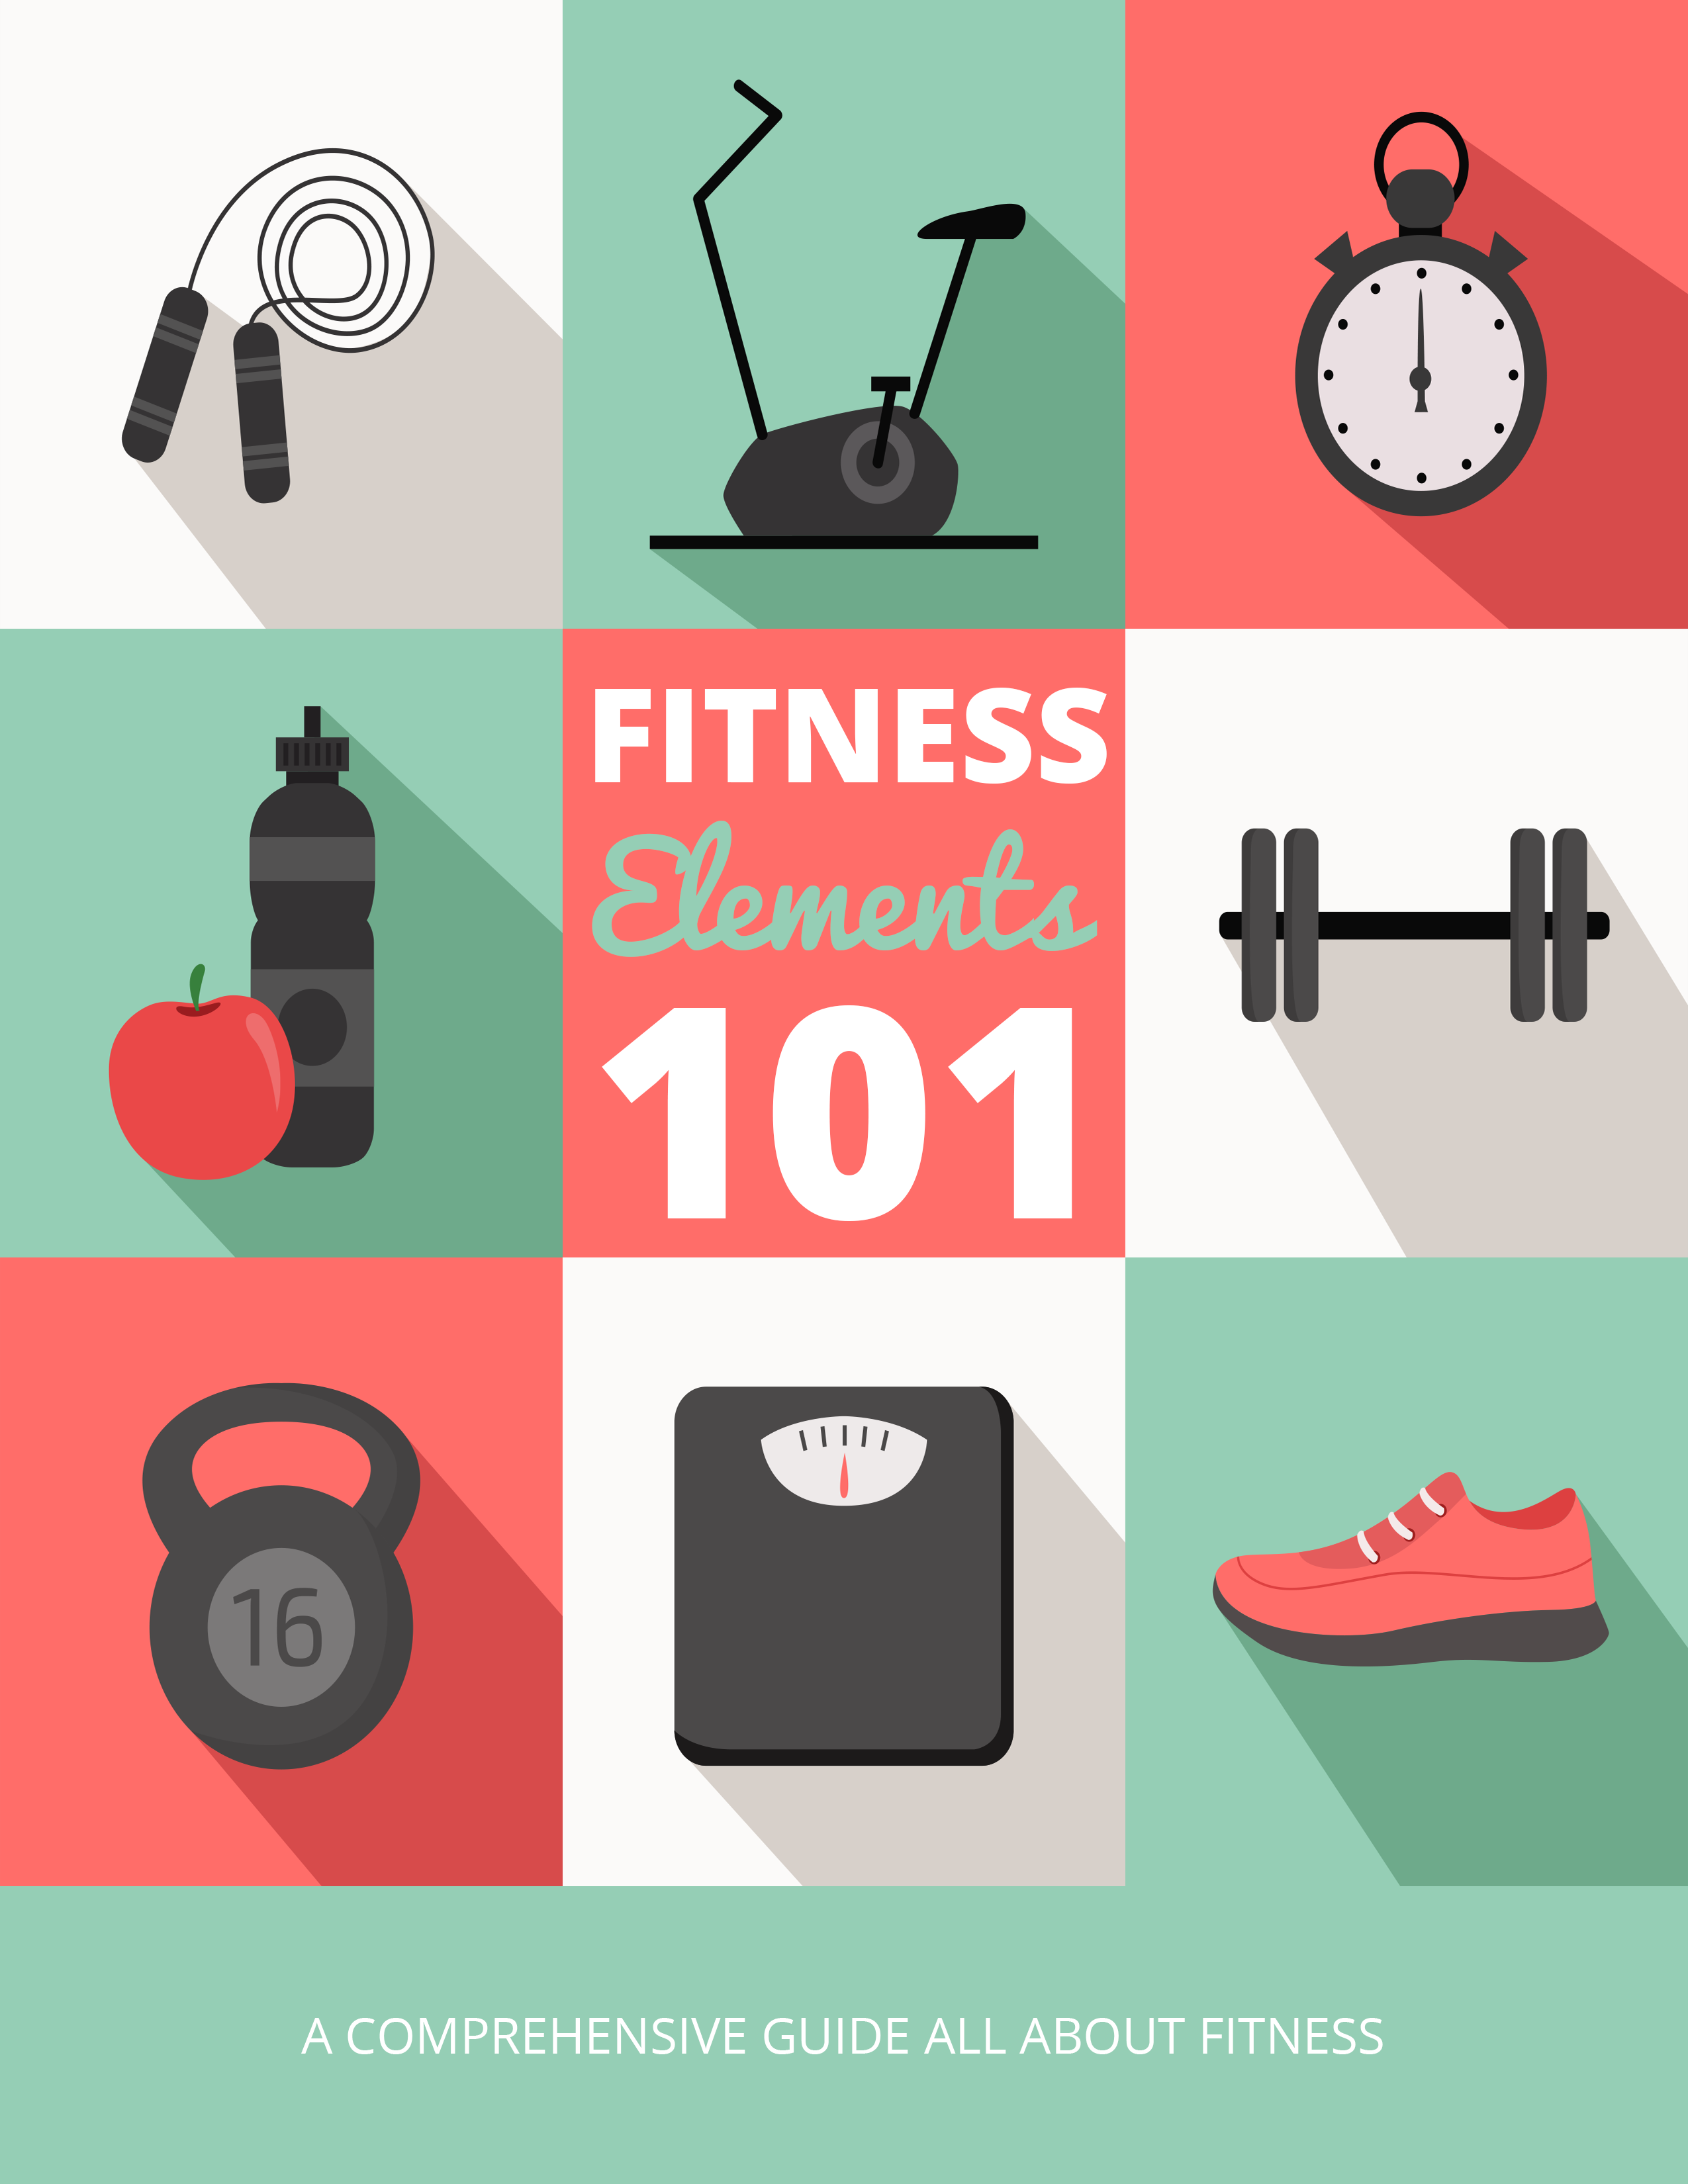 Fitness Elements 101 (A Comprehensive Guide All About Fitness) Ebook's Book Image